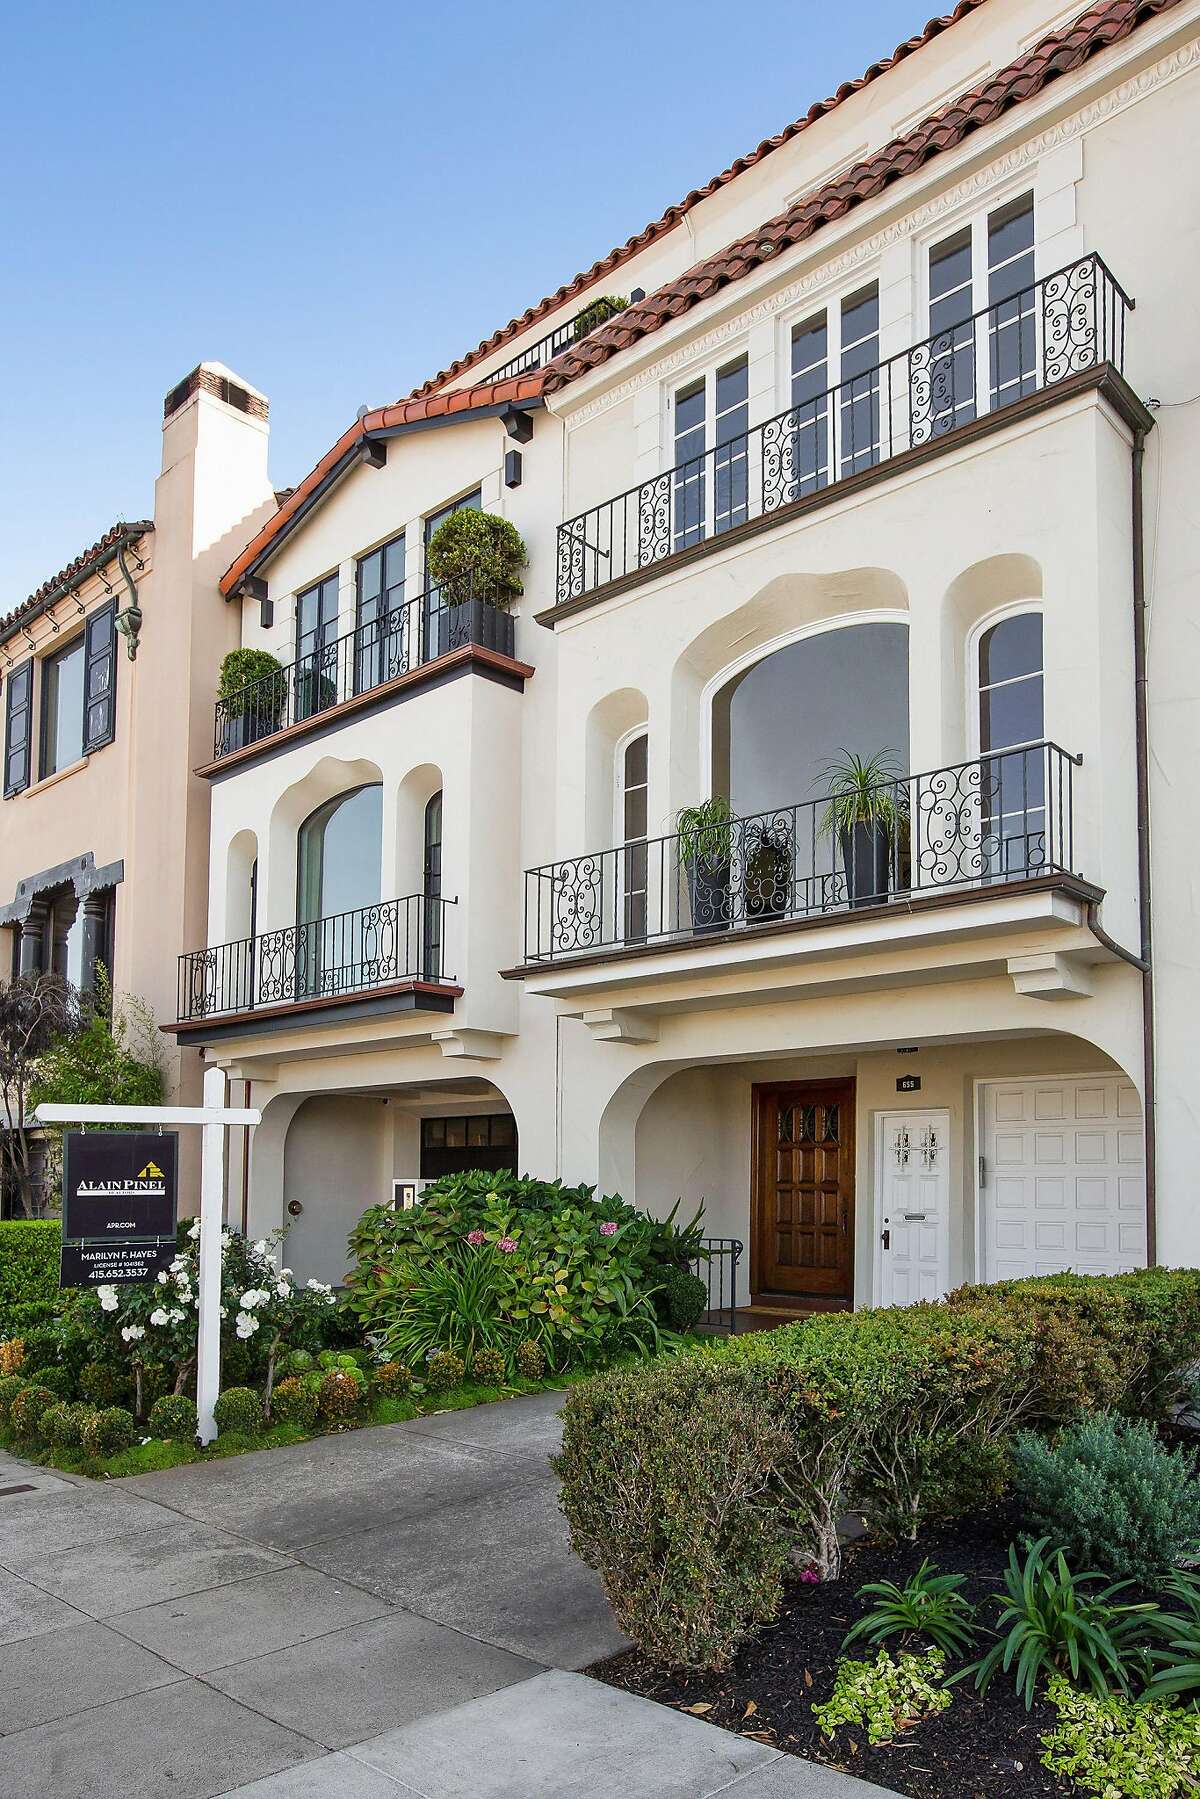 655 Marina Blvd. in the Marina District is a five-bedroom, four-bathroom Mediterranean that frames views of San Francisco Bay, St. Francis Yacht Club and the Golden Gate Bridge.